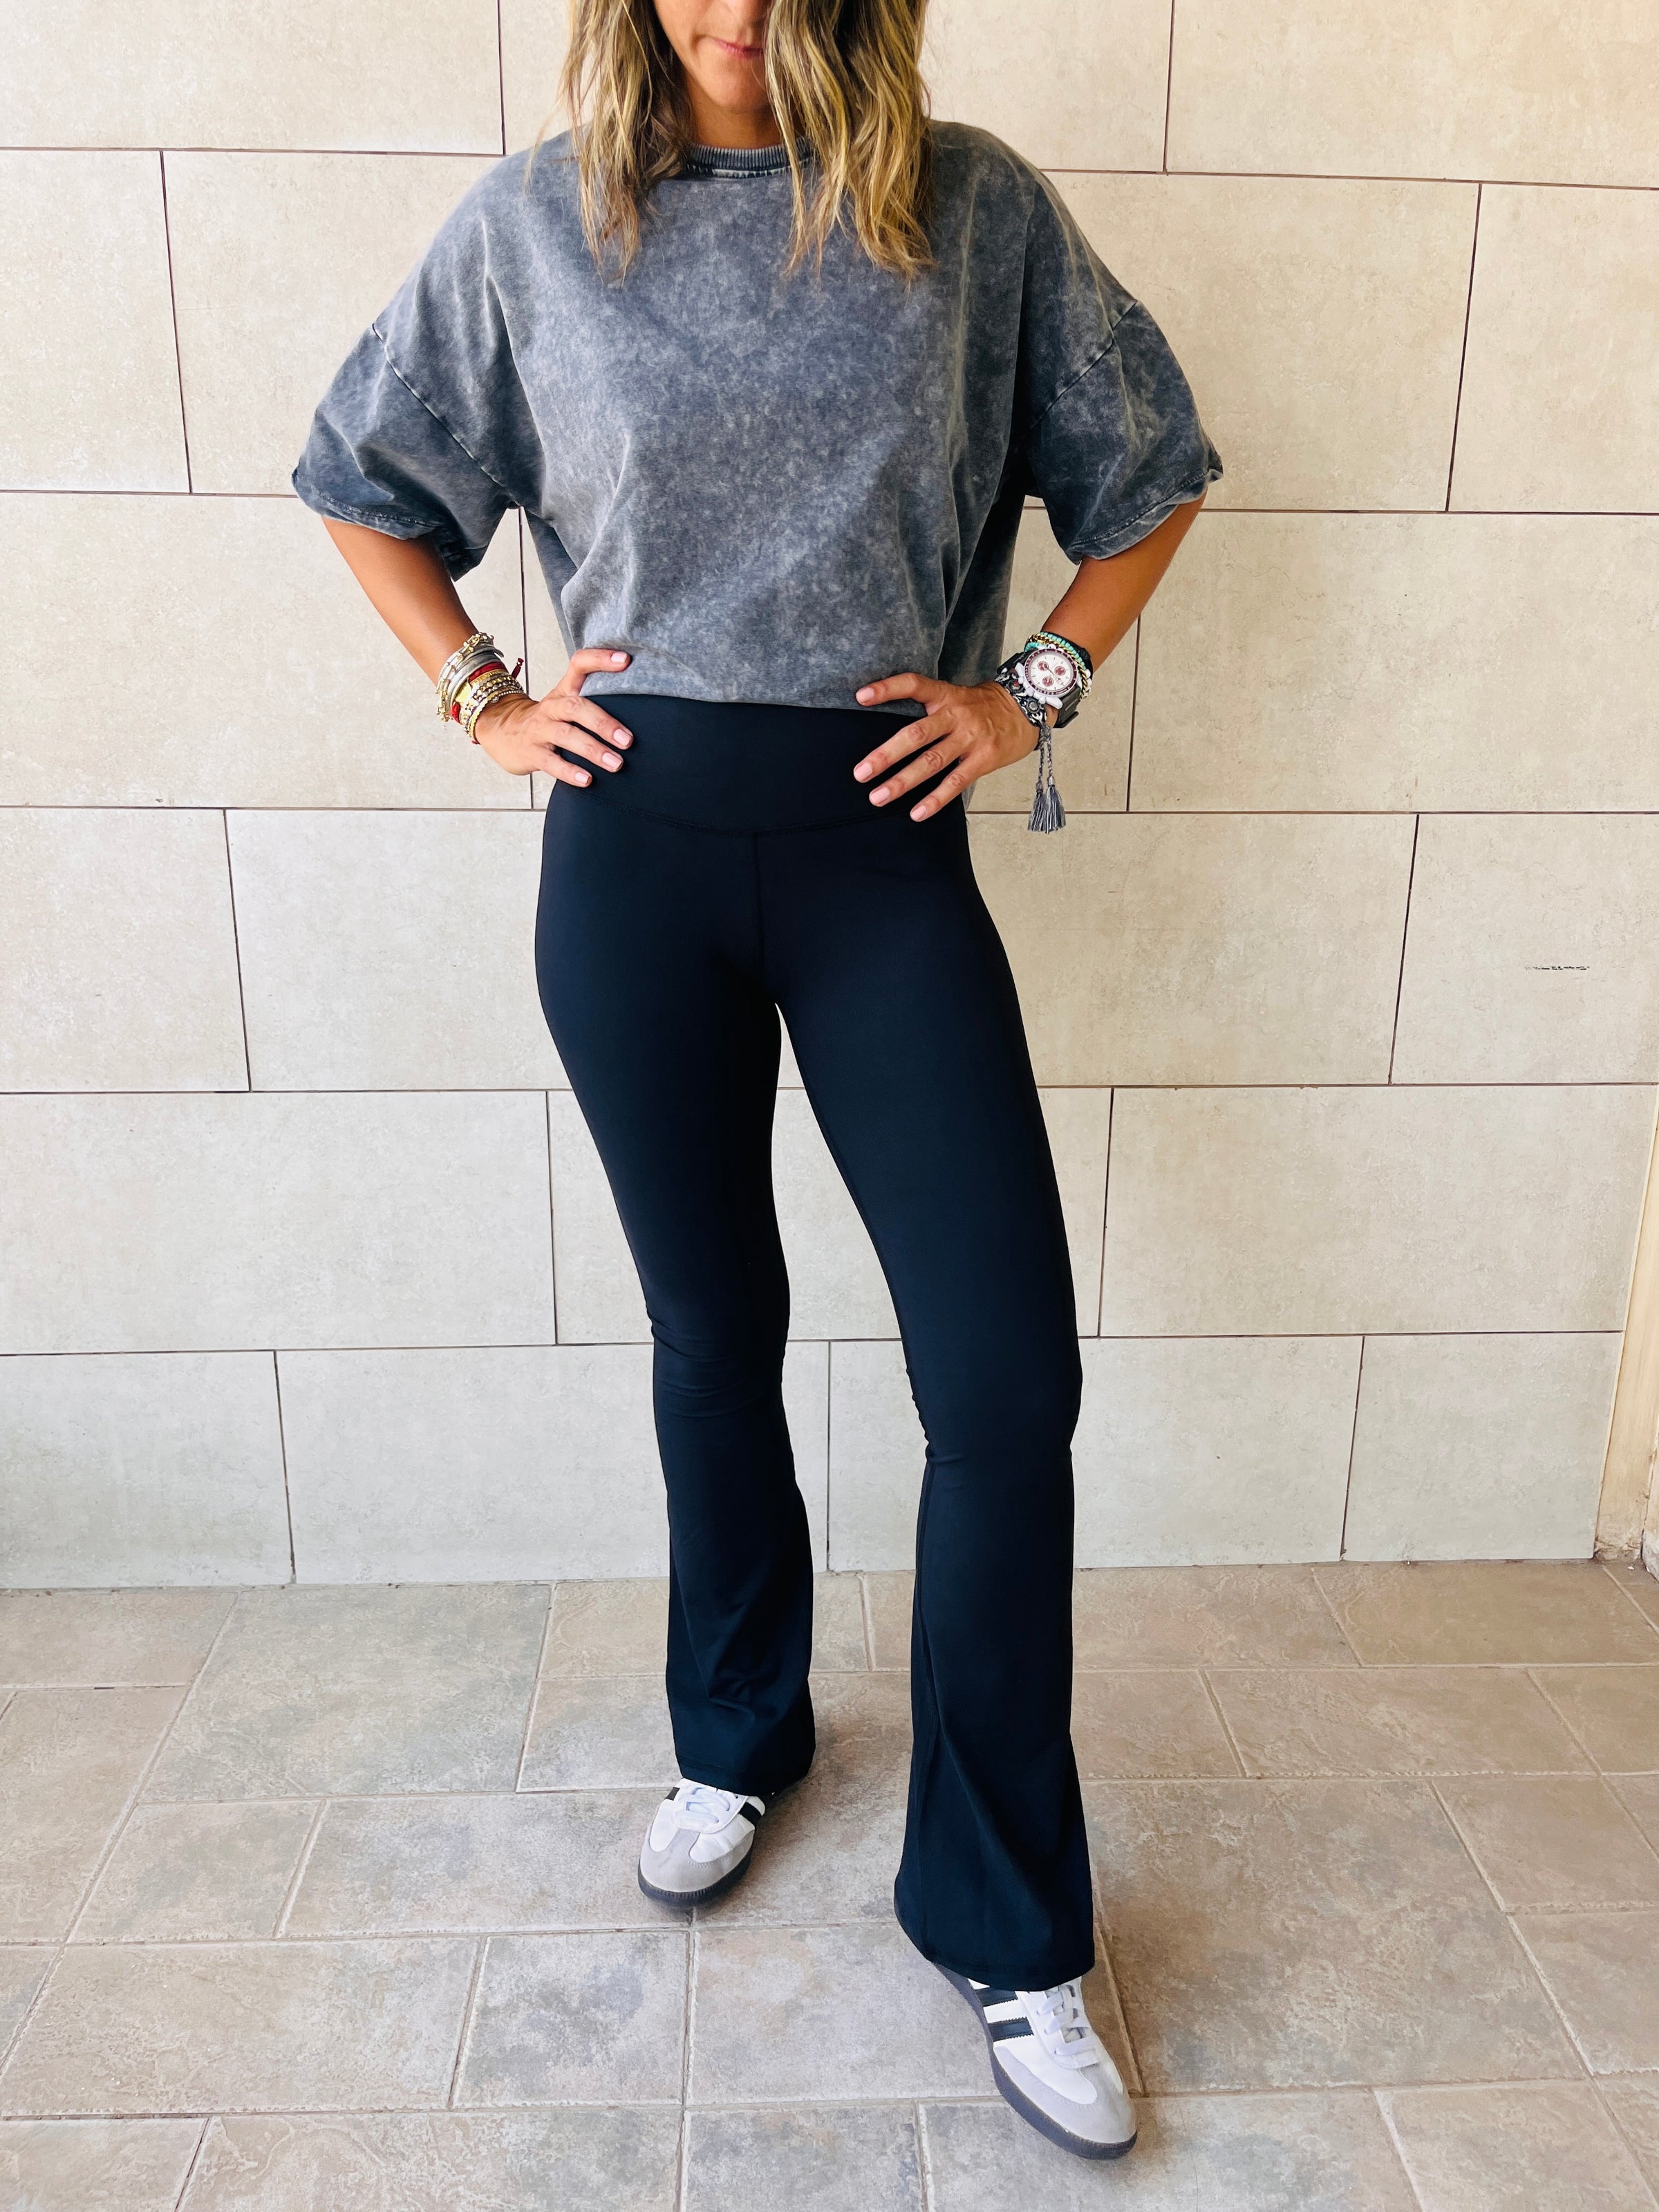 Black Flare Pants Outfit Ideas